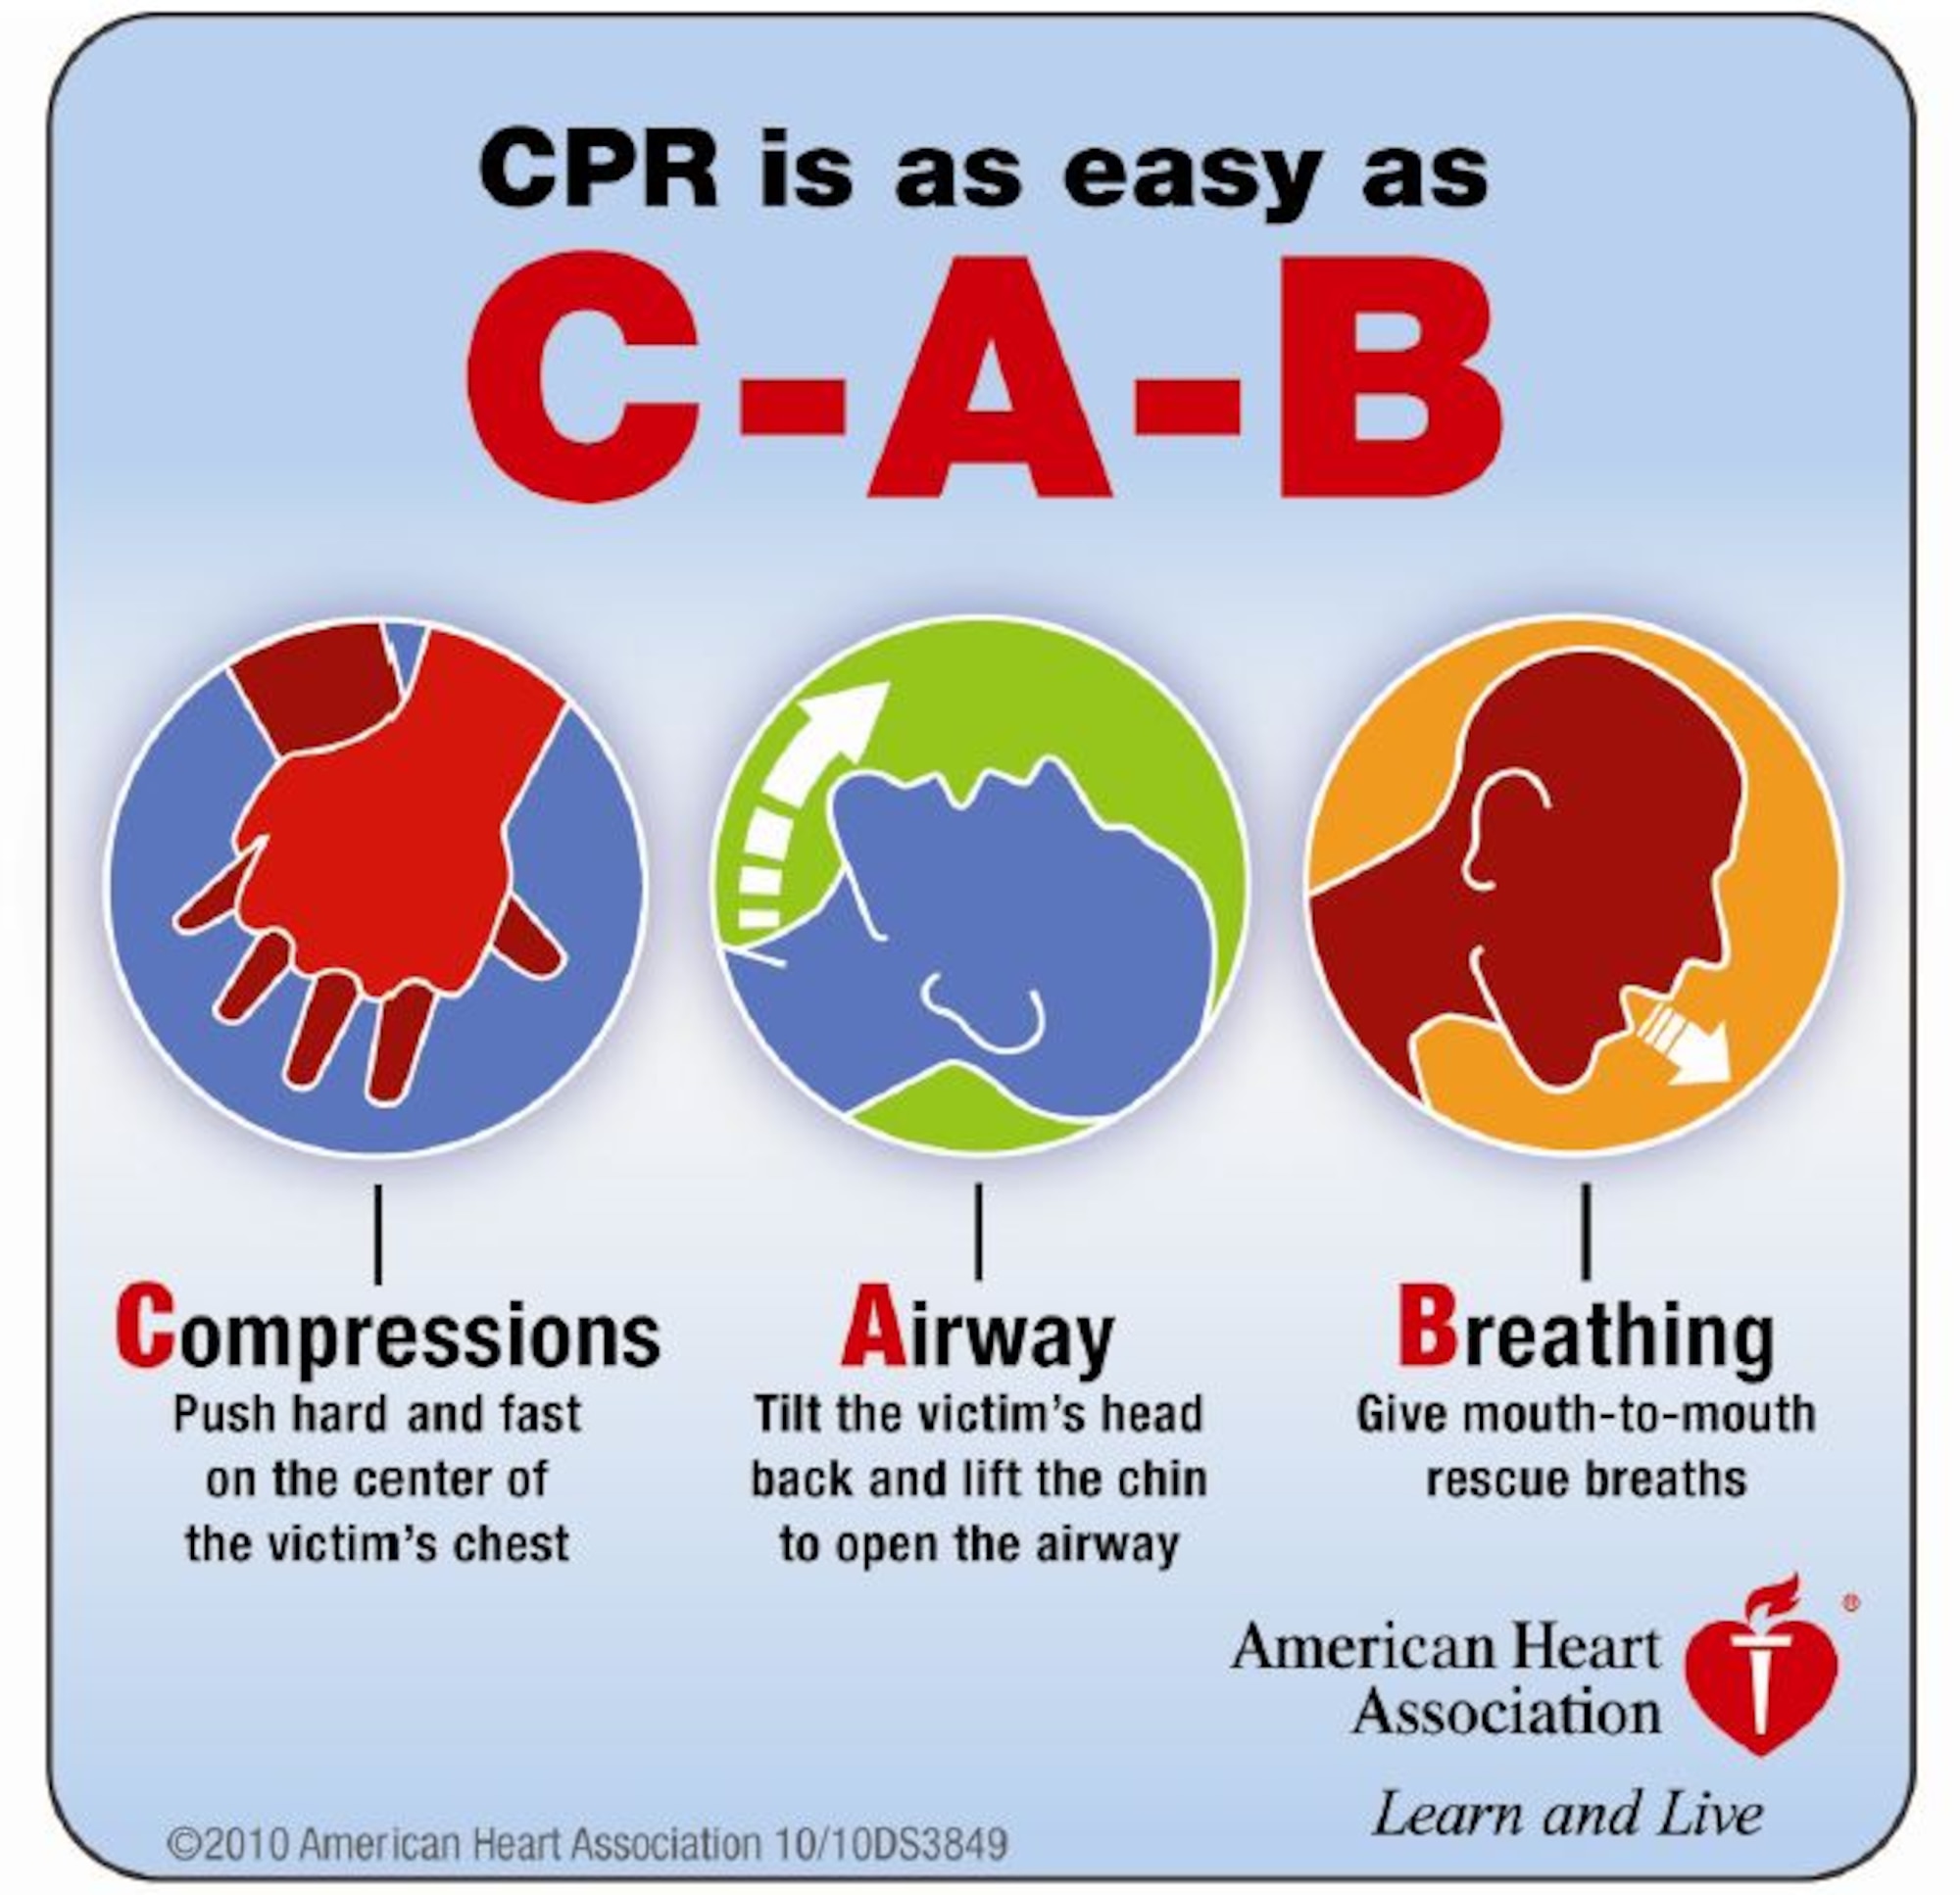 In compliance with scientific changes found in 2010, the new American Heart Association guidelines for Cardiopulmonary Resuscitation went into effect April 1. The most significant change trainees might notice is a change in the basic life support sequence of steps for trained rescuers from “A-B-C” (Airway, Breathing, Chest compressions) to “C-A-B” (Chest compressions, Airway, Breathing). (COURTESY PHOTO)